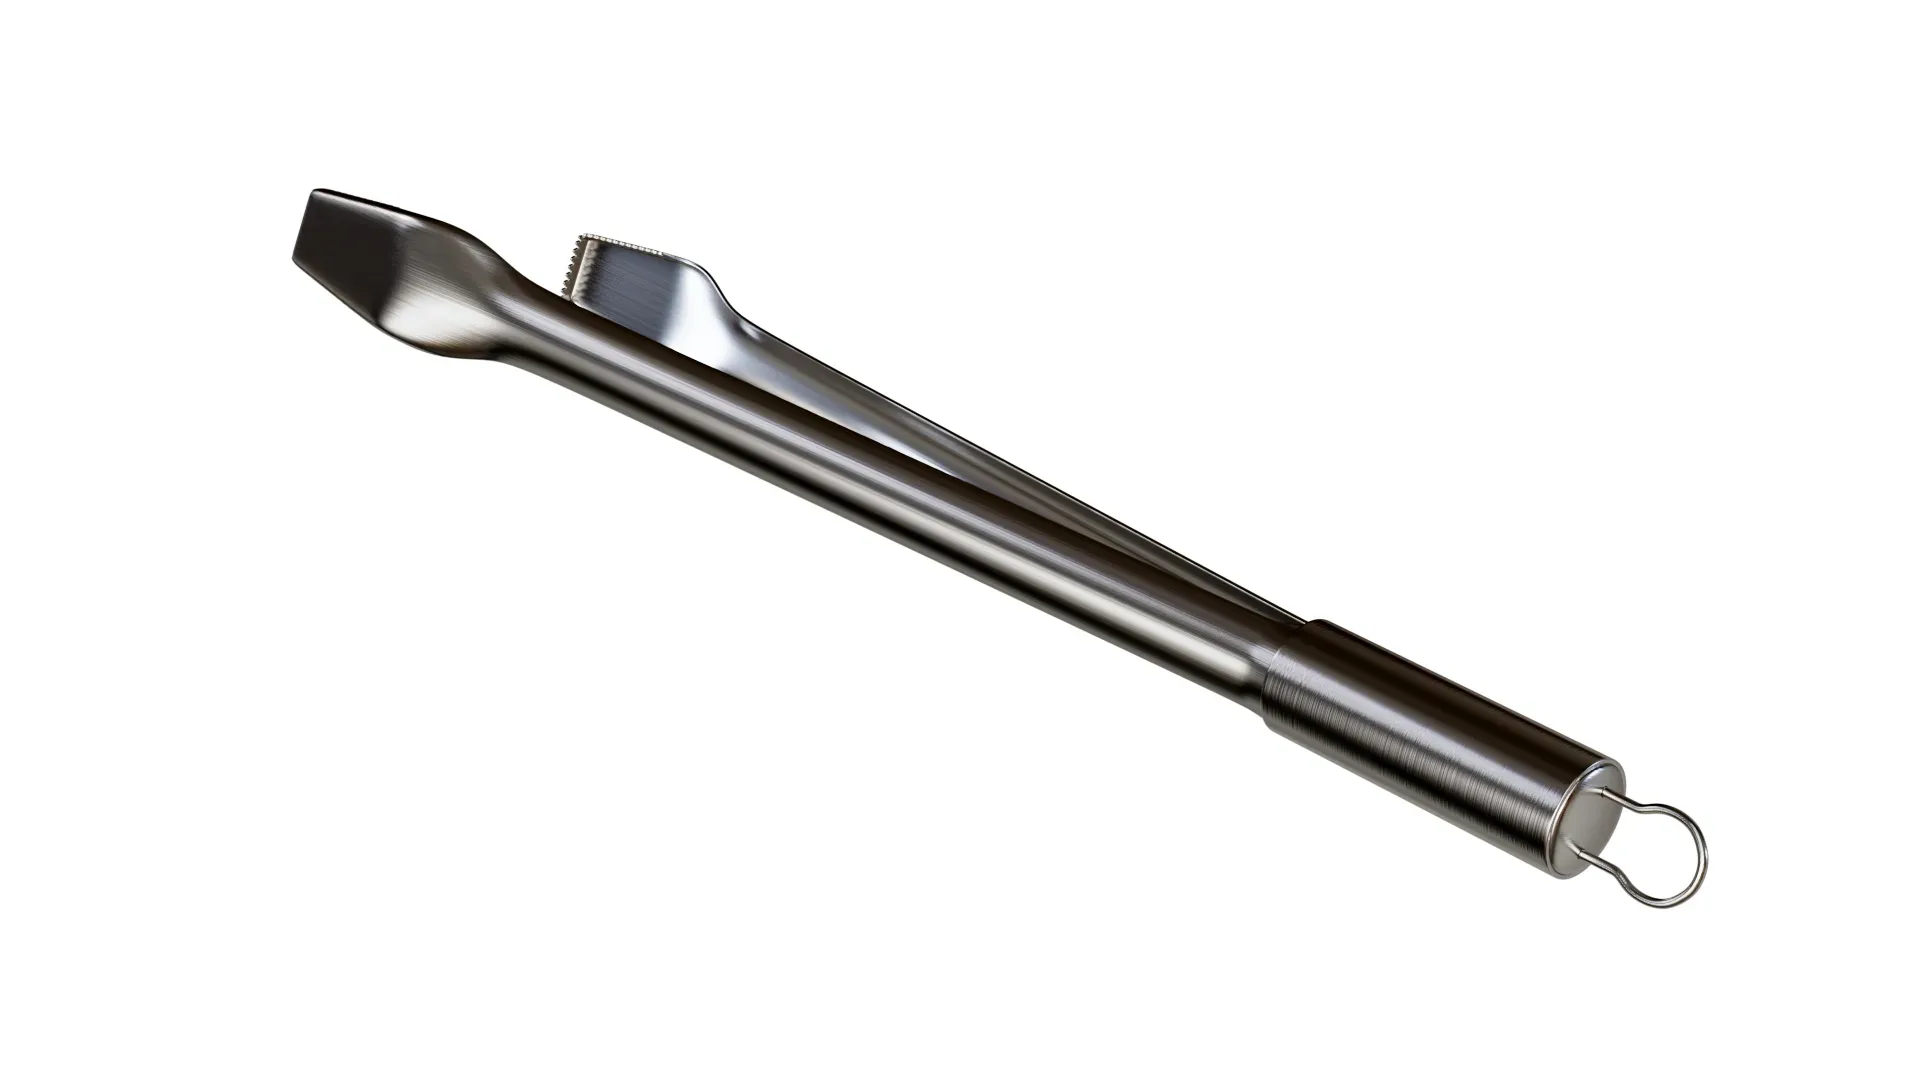 Barbecue Tongs